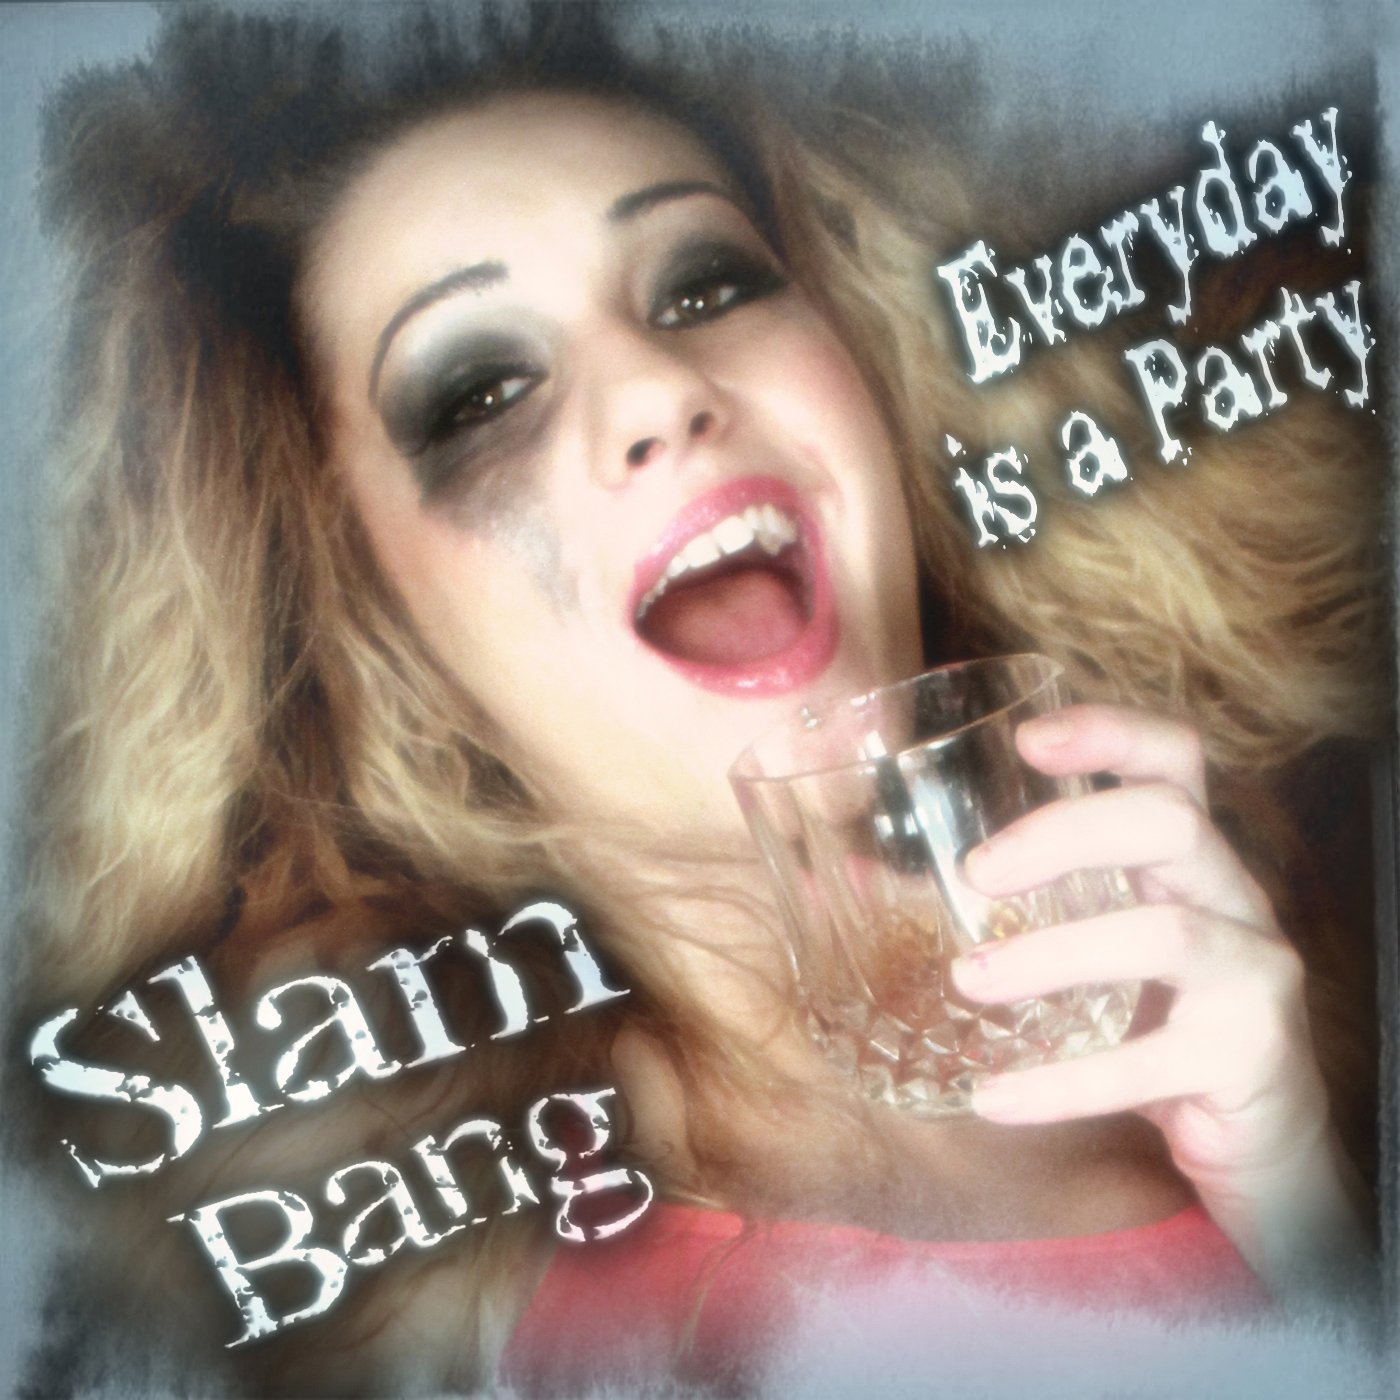 Everyday is a Party by Slam Bang USB Wristband